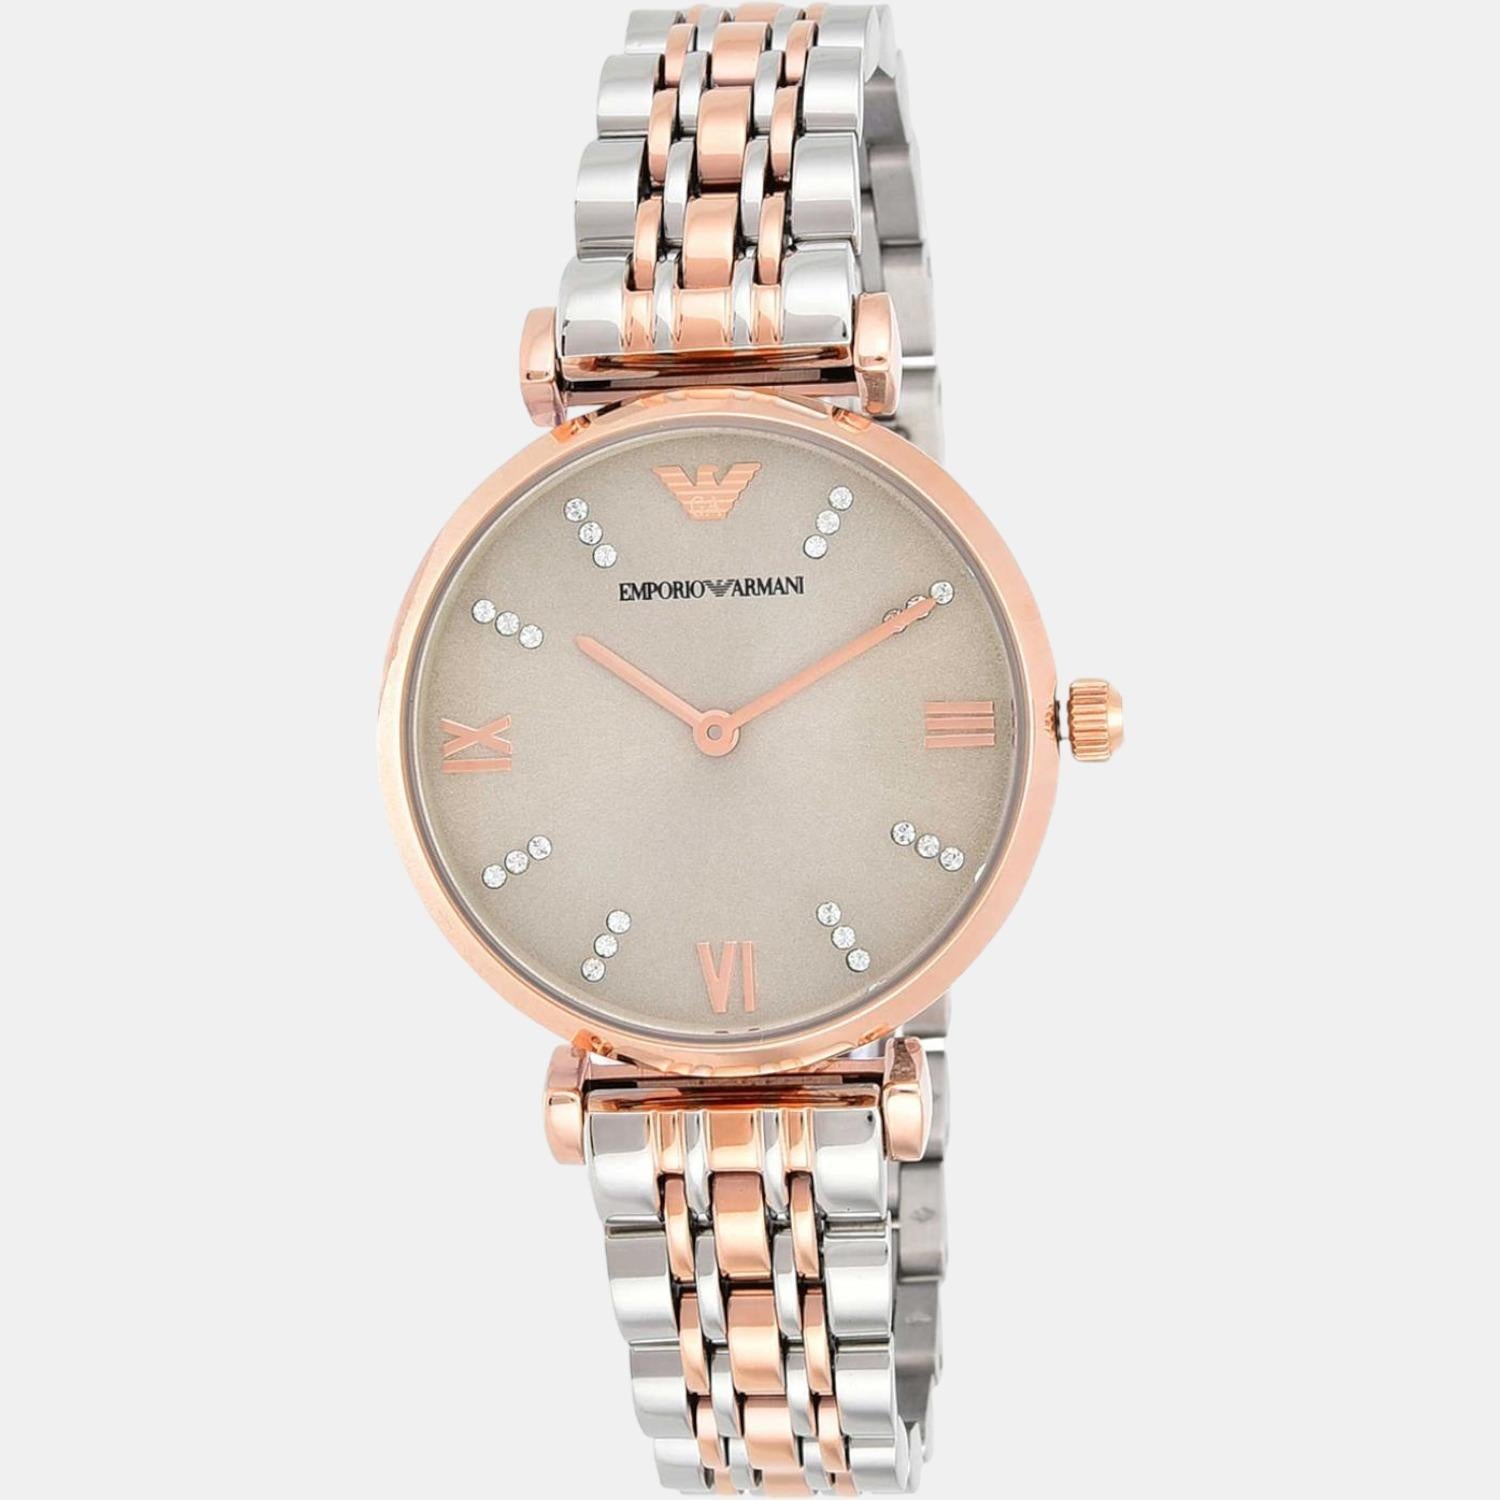 Women's Watches for Sale in UAE - Add Timeless Piece - Casual, Smartwatches  | OpenSooq